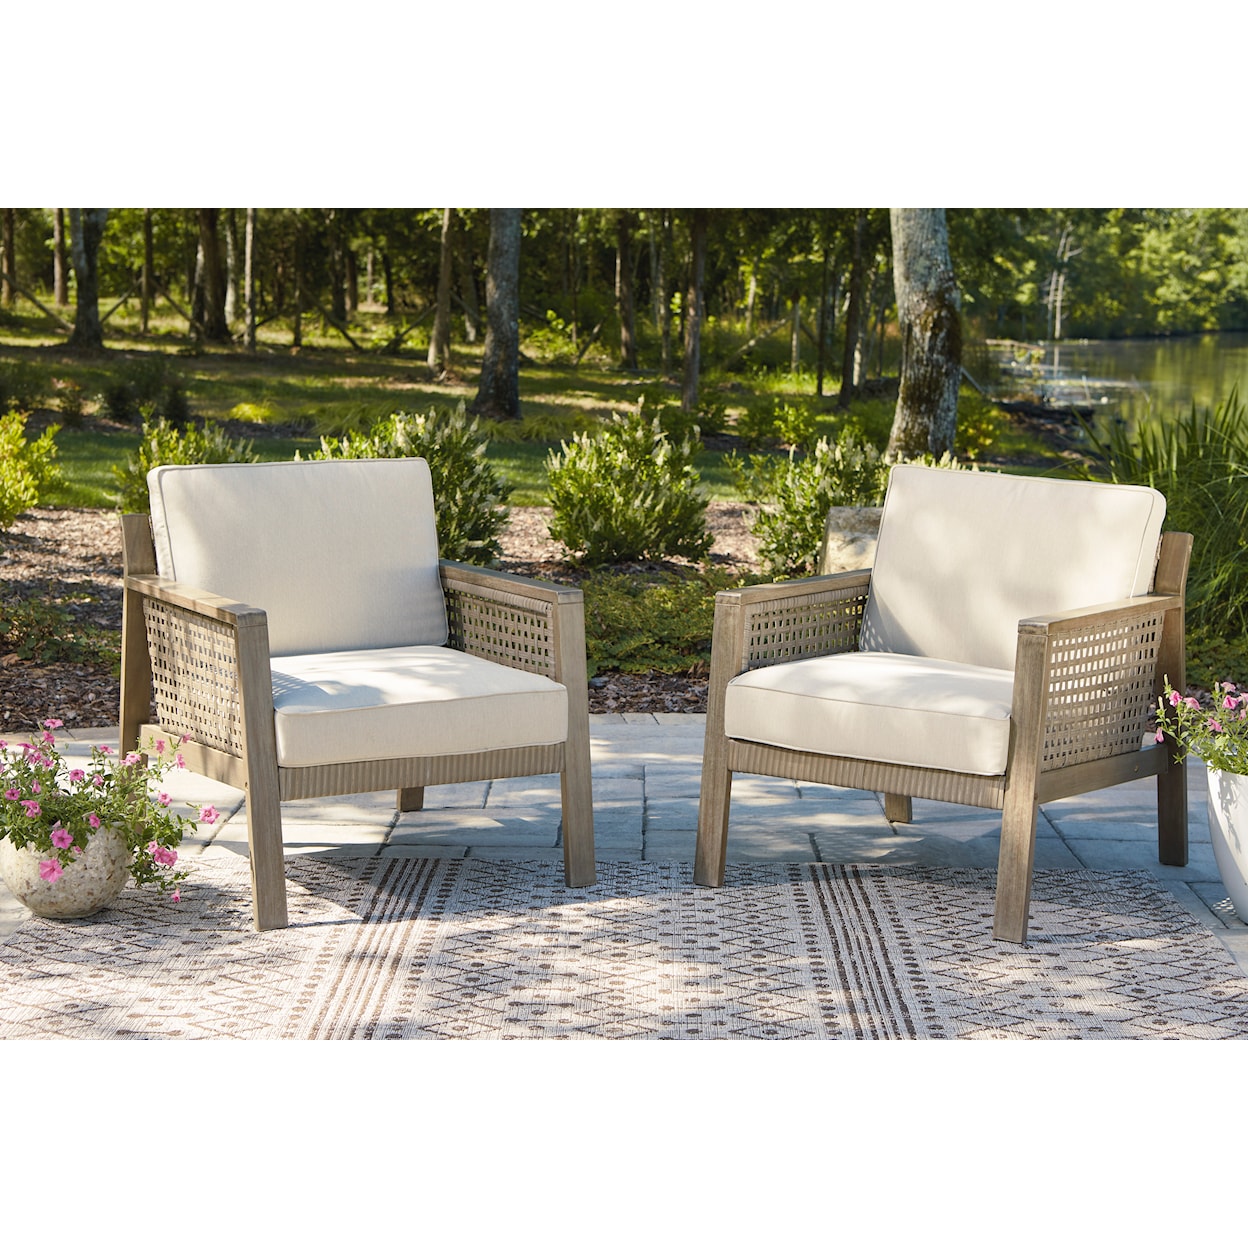 Signature Design by Ashley Barn Cove Lounge Chair with Cushion (Set of 2)